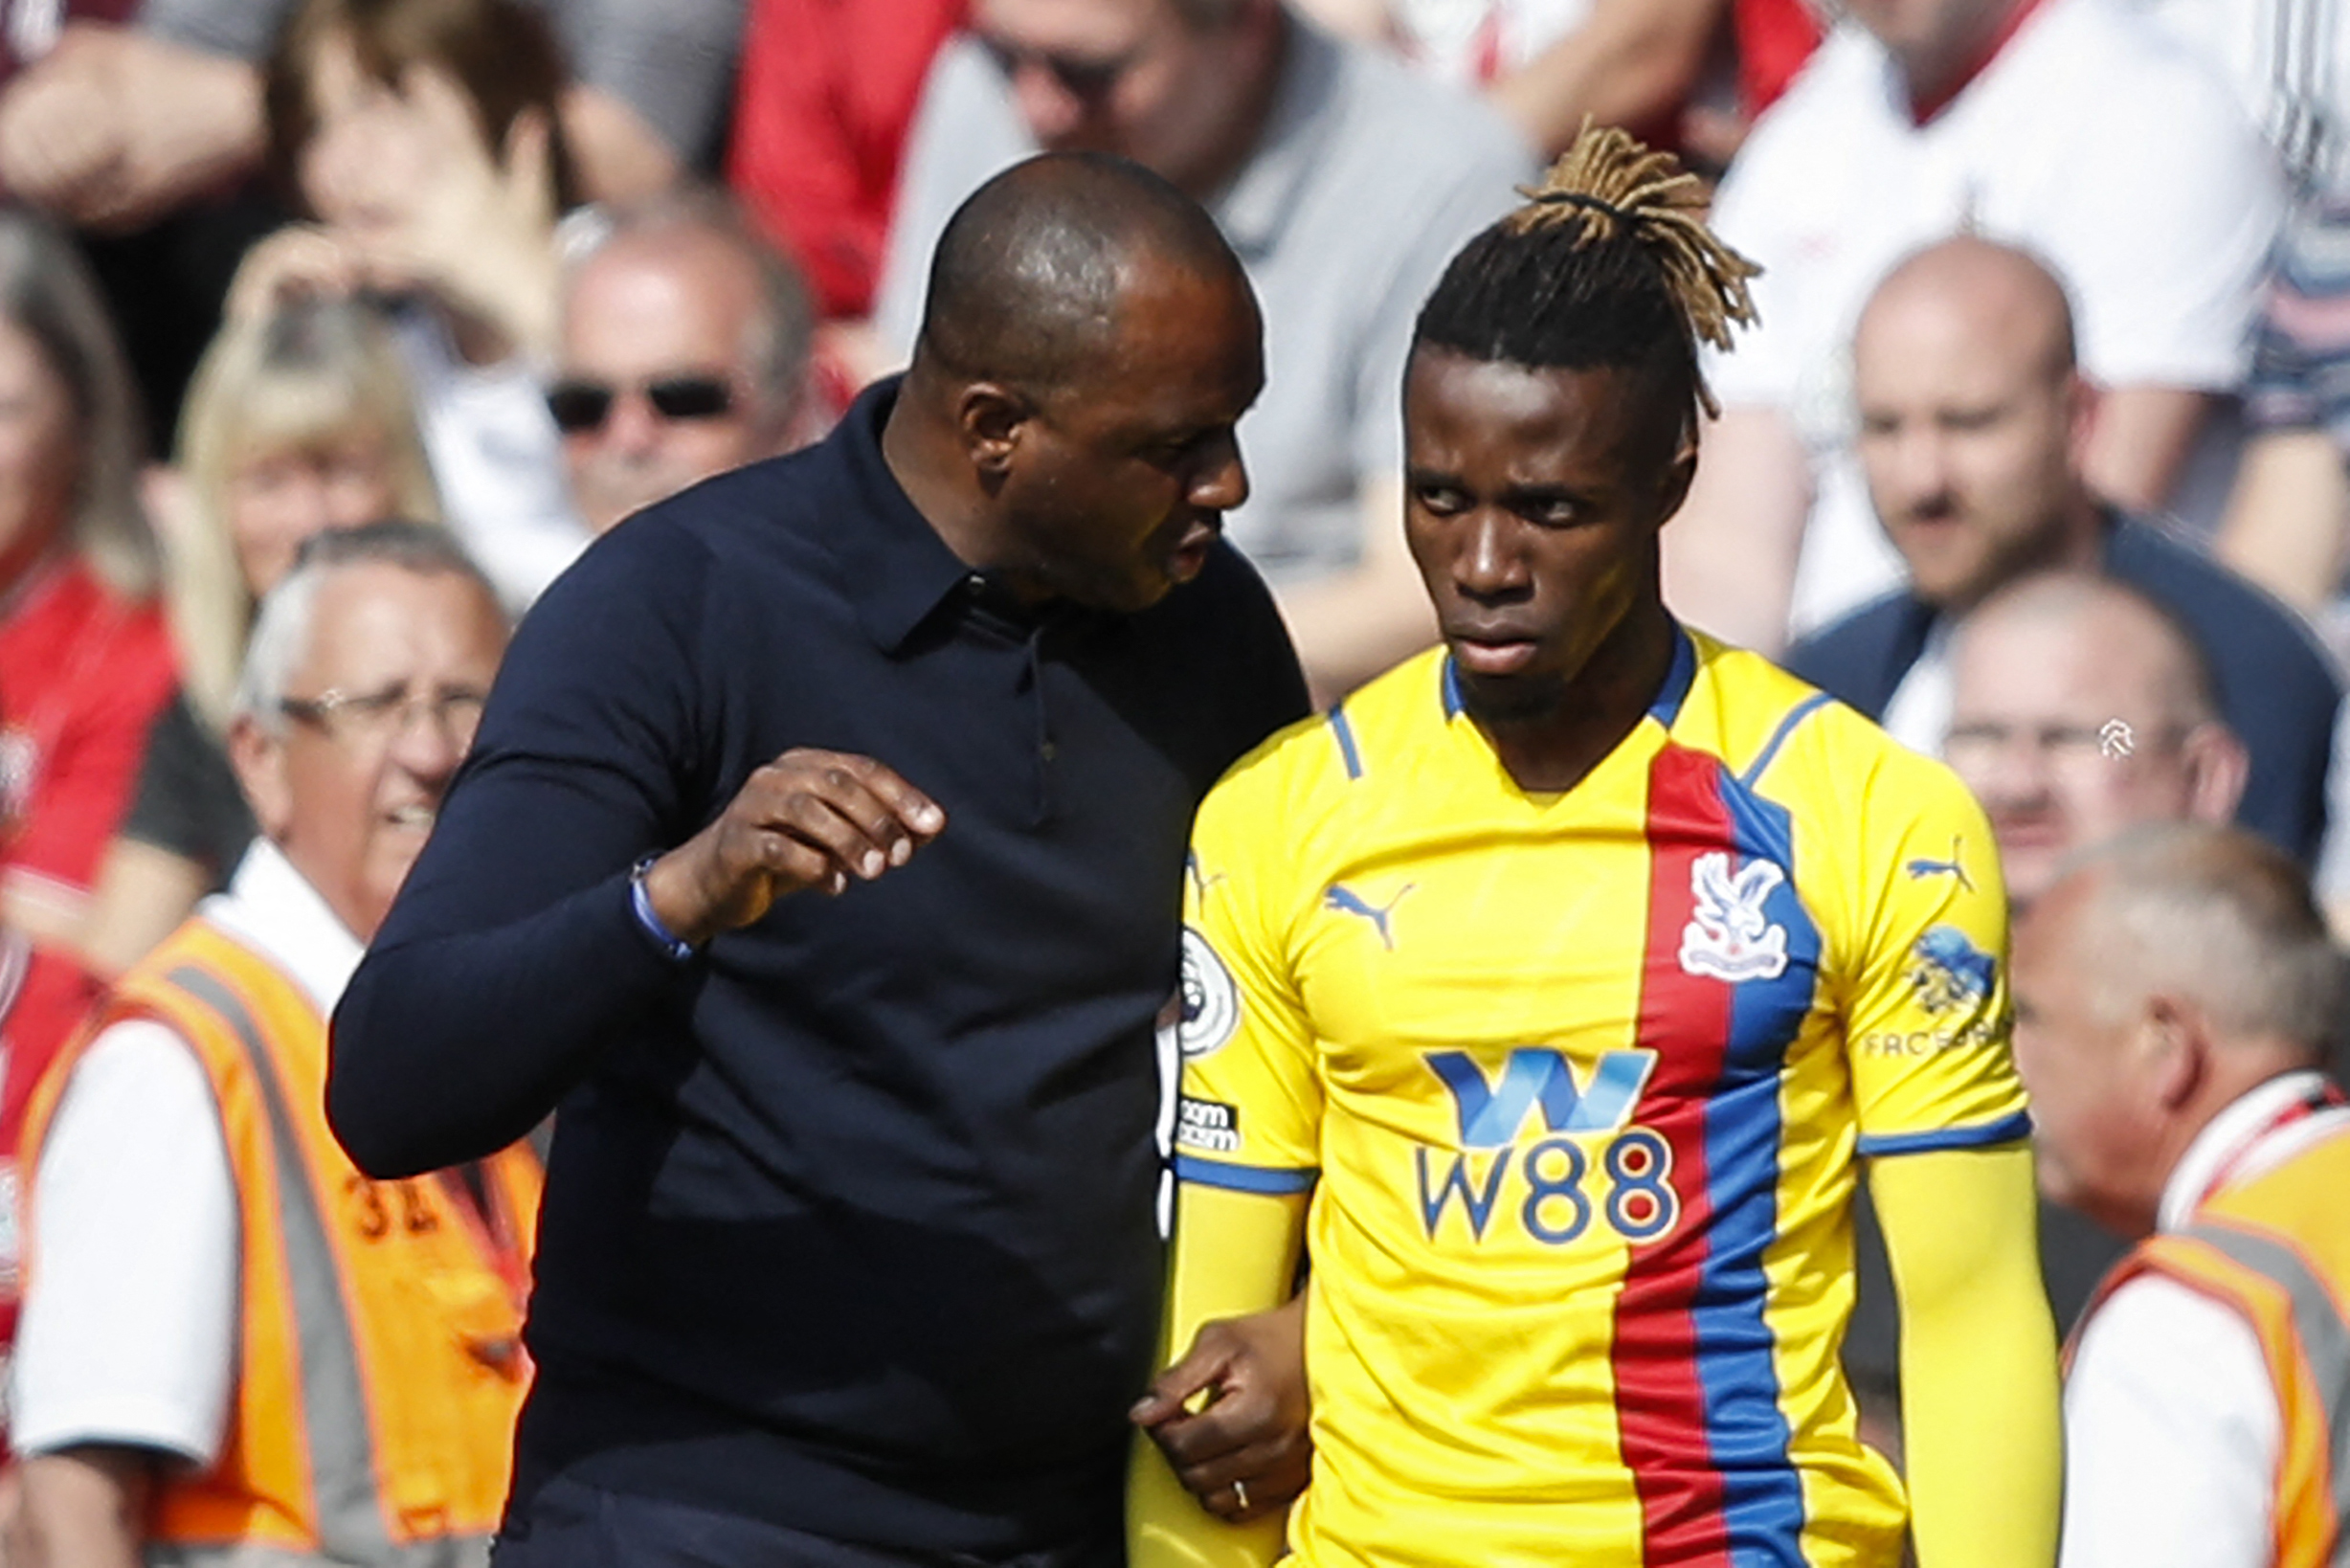 Crystal Palace's French manager Patrick Vieira (L) speaks to Crystal Palace's Ivorian striker Wilfried Zaha.